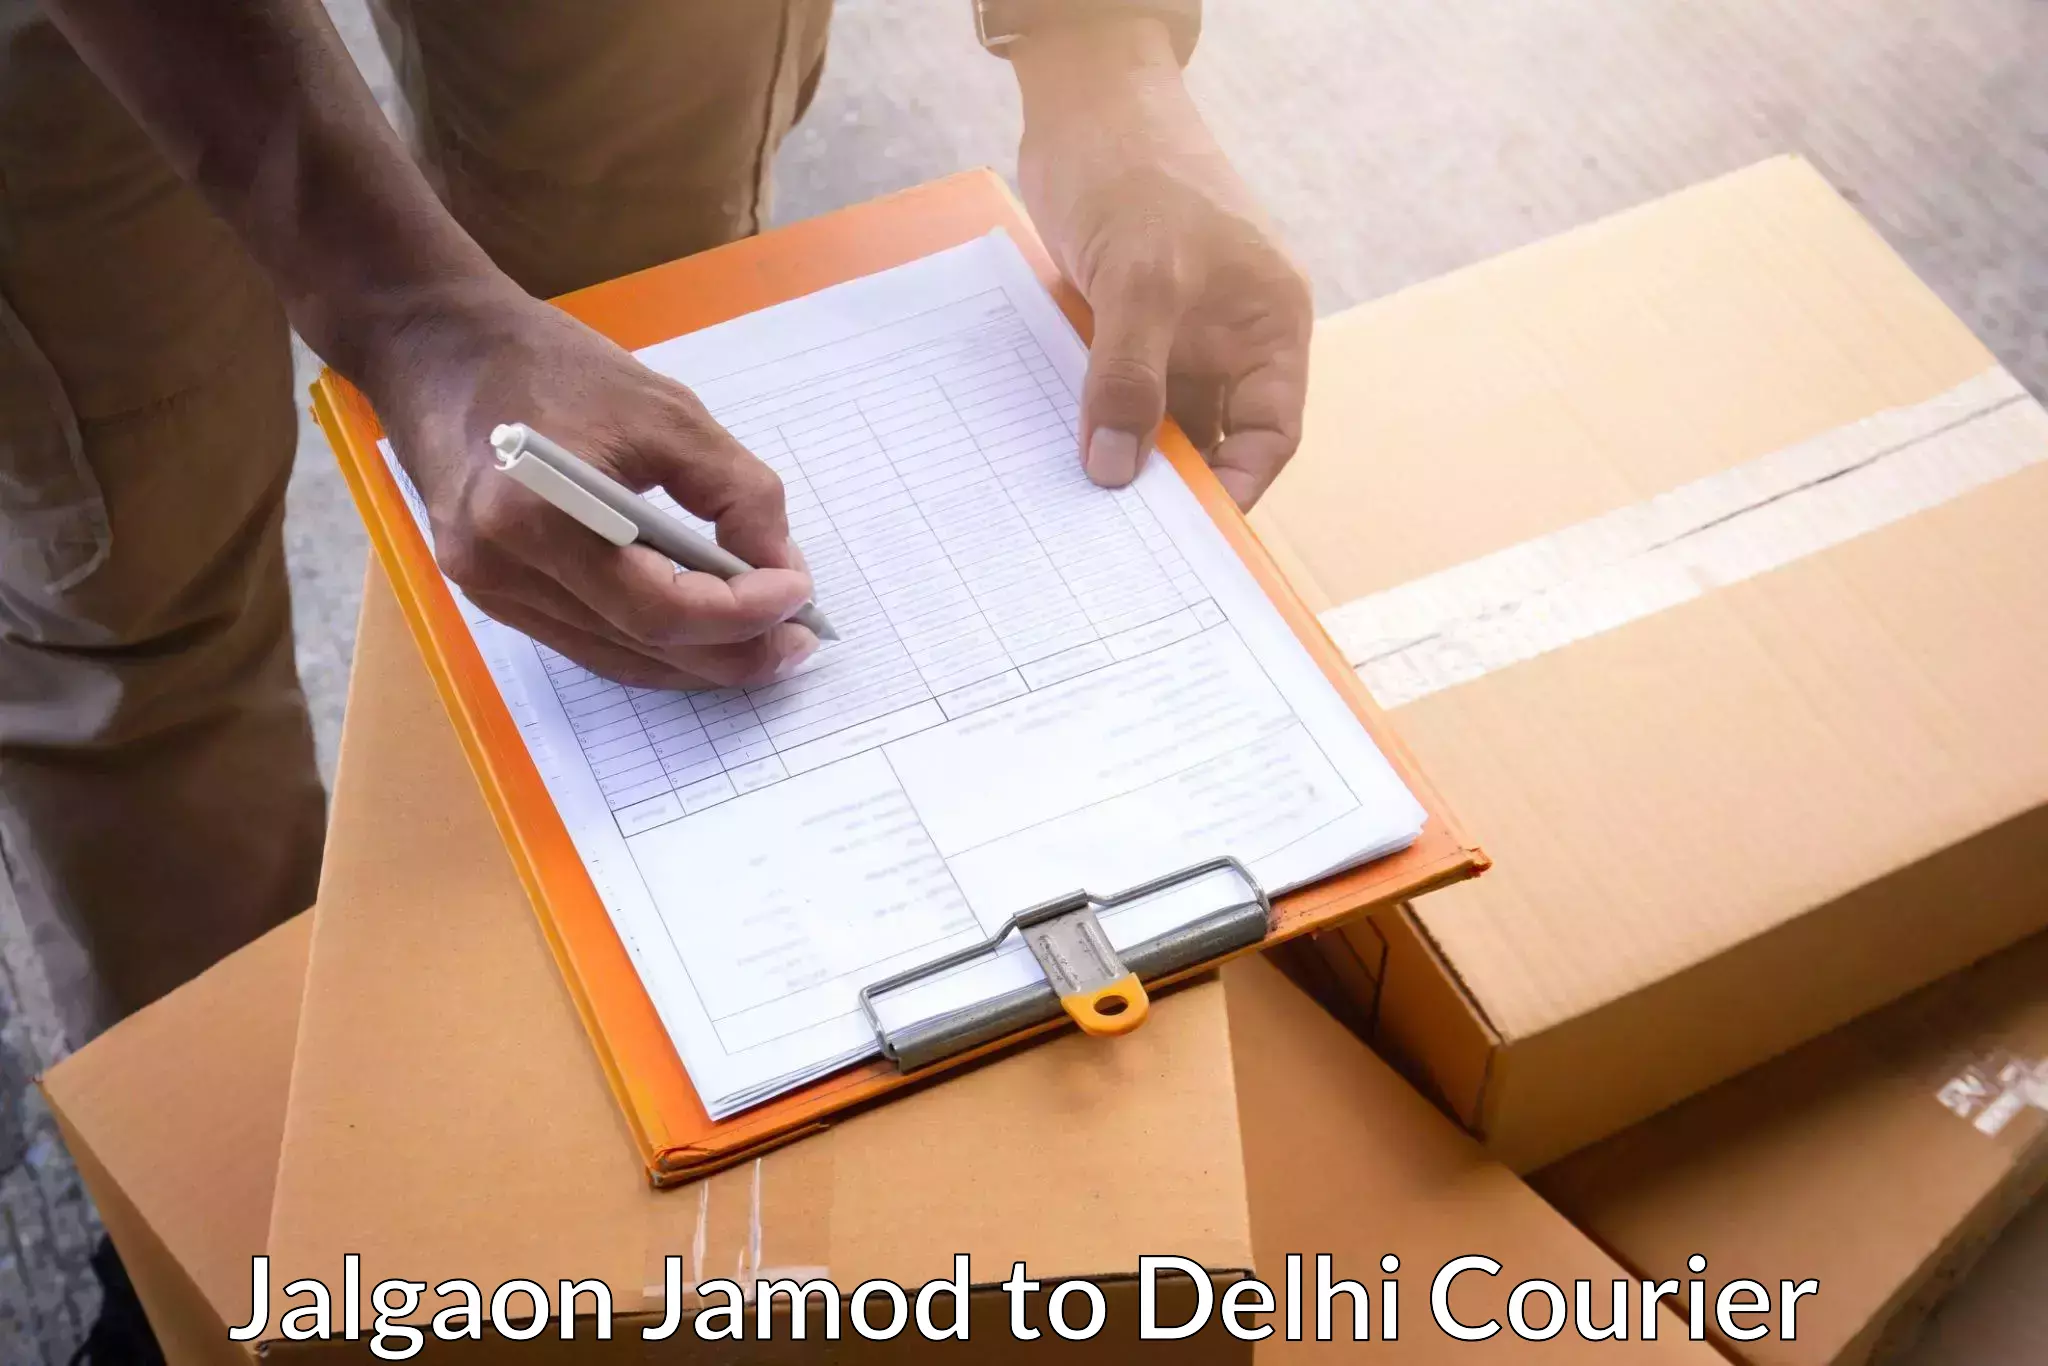 24-hour courier services in Jalgaon Jamod to East Delhi